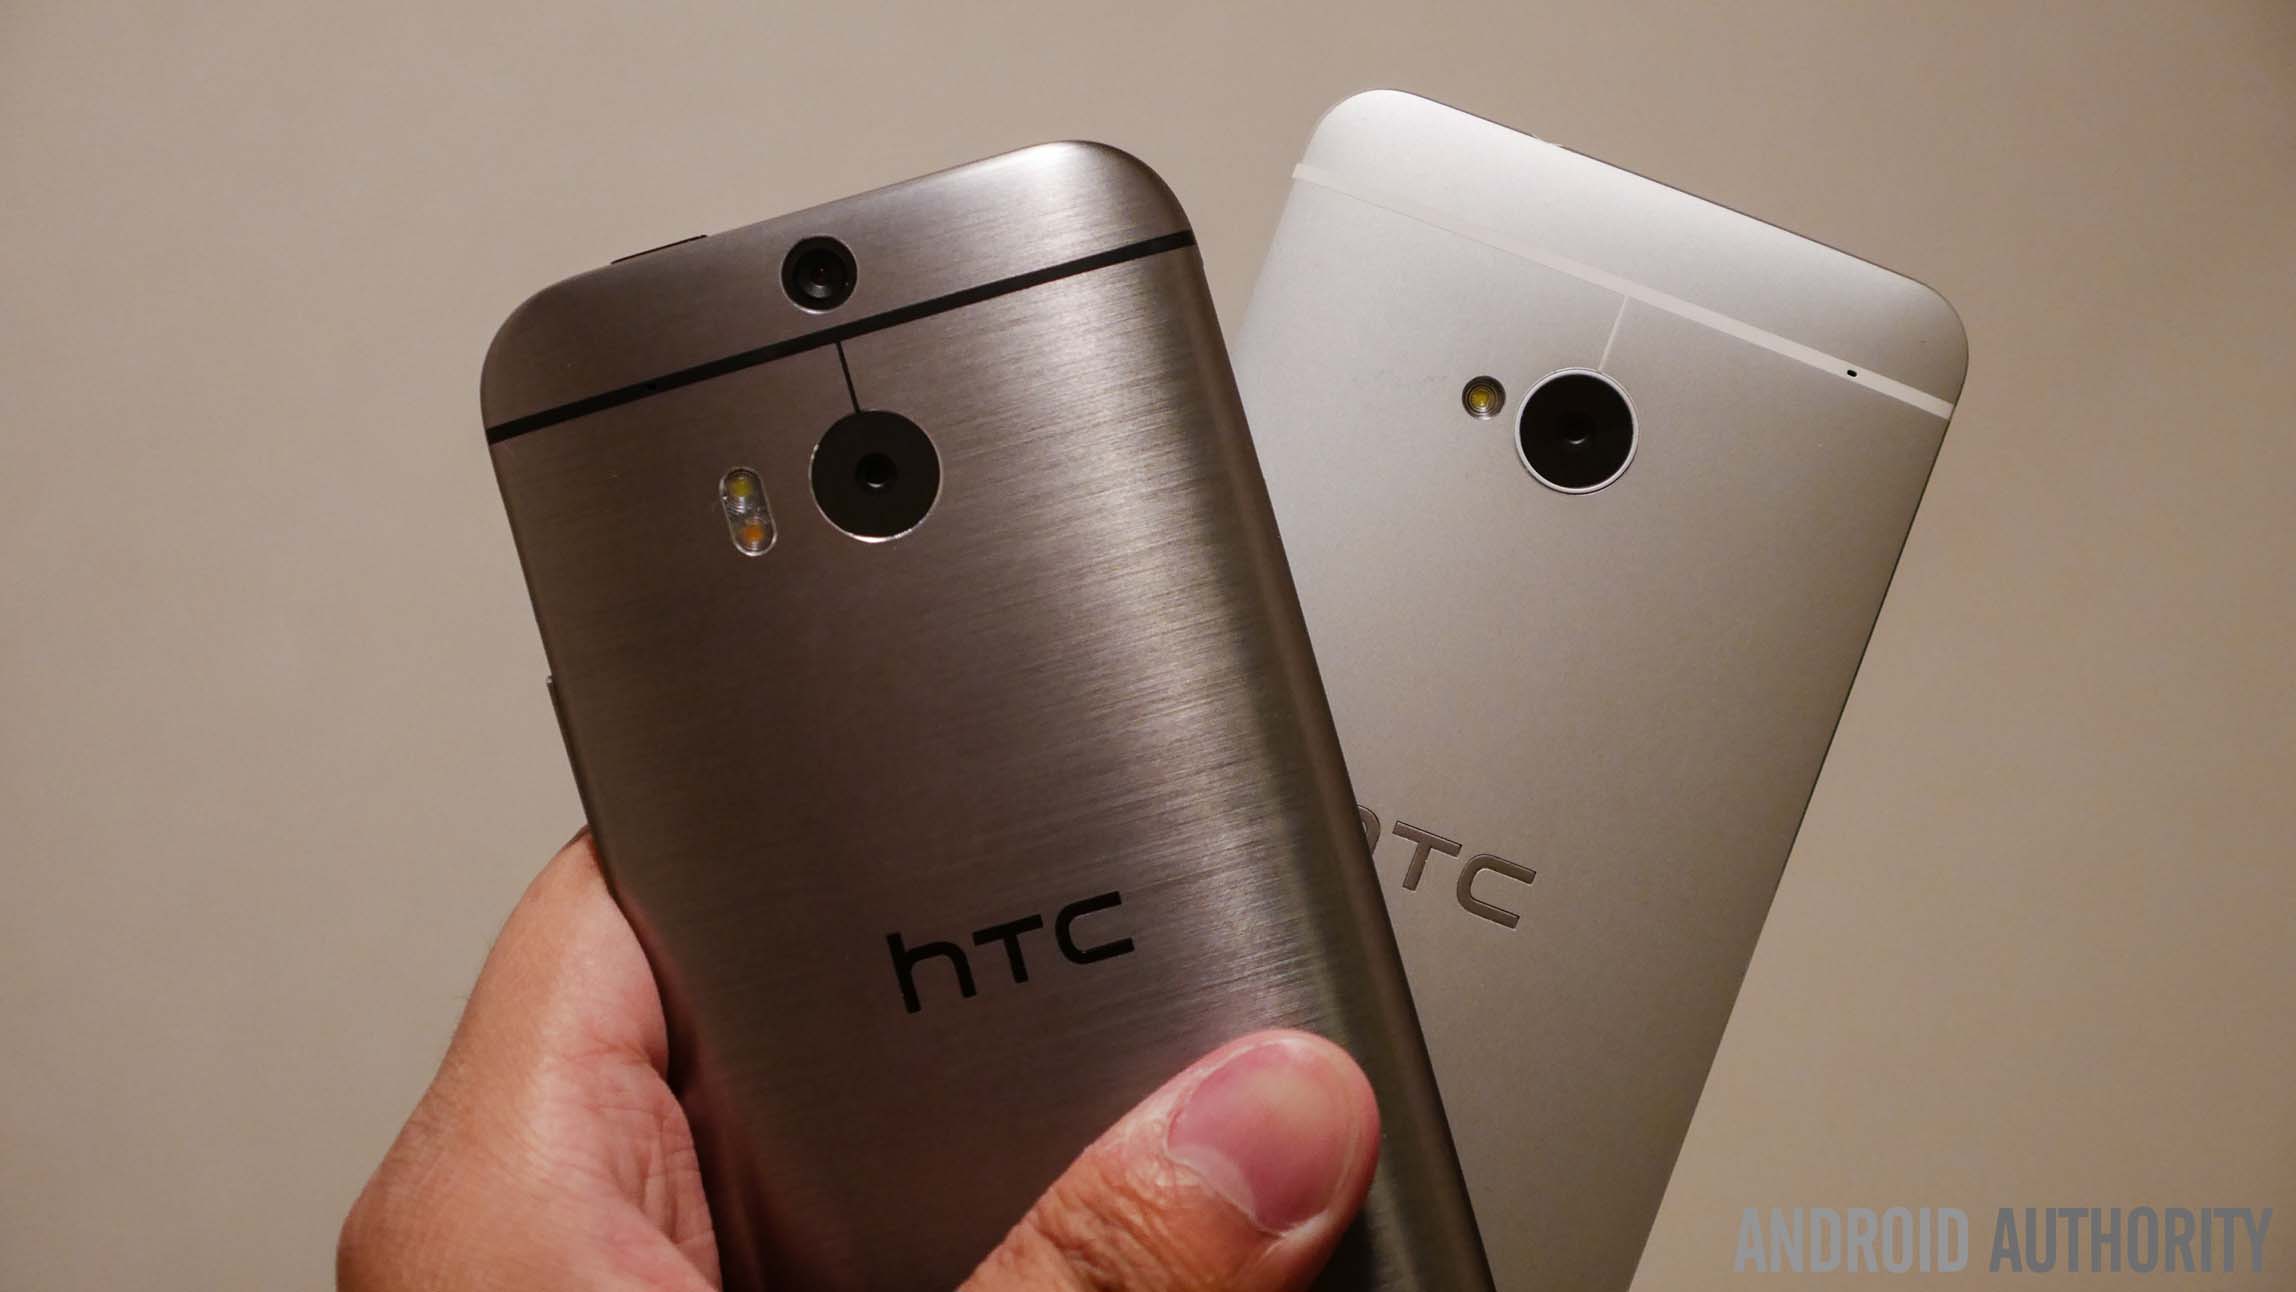 htc-one-m8-vs-htc-one-m7-quick-look-aa-15-of-19